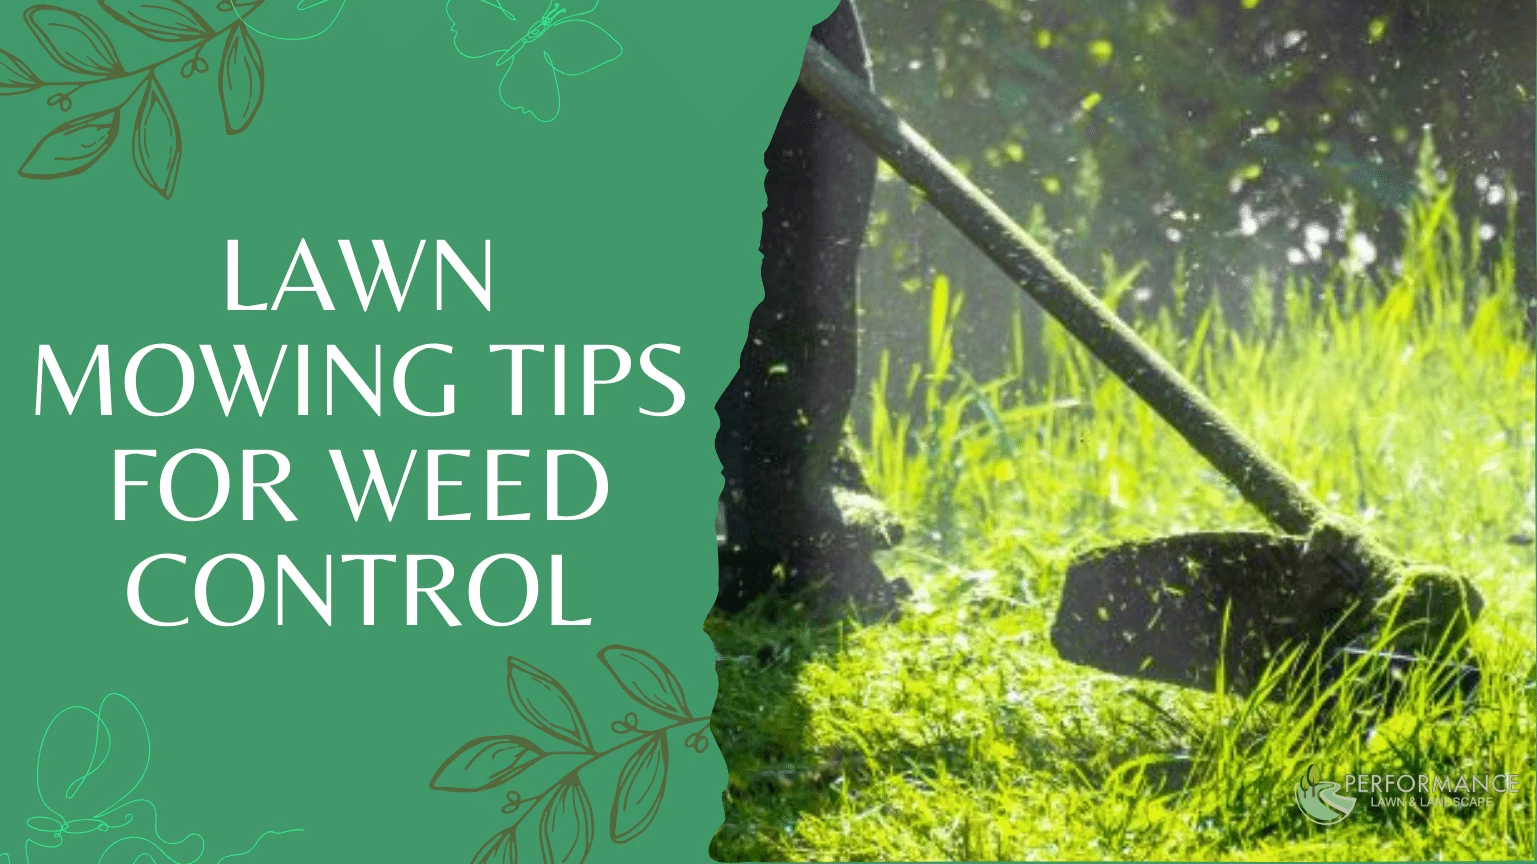 Lawn Mowing Tips for Weed Control